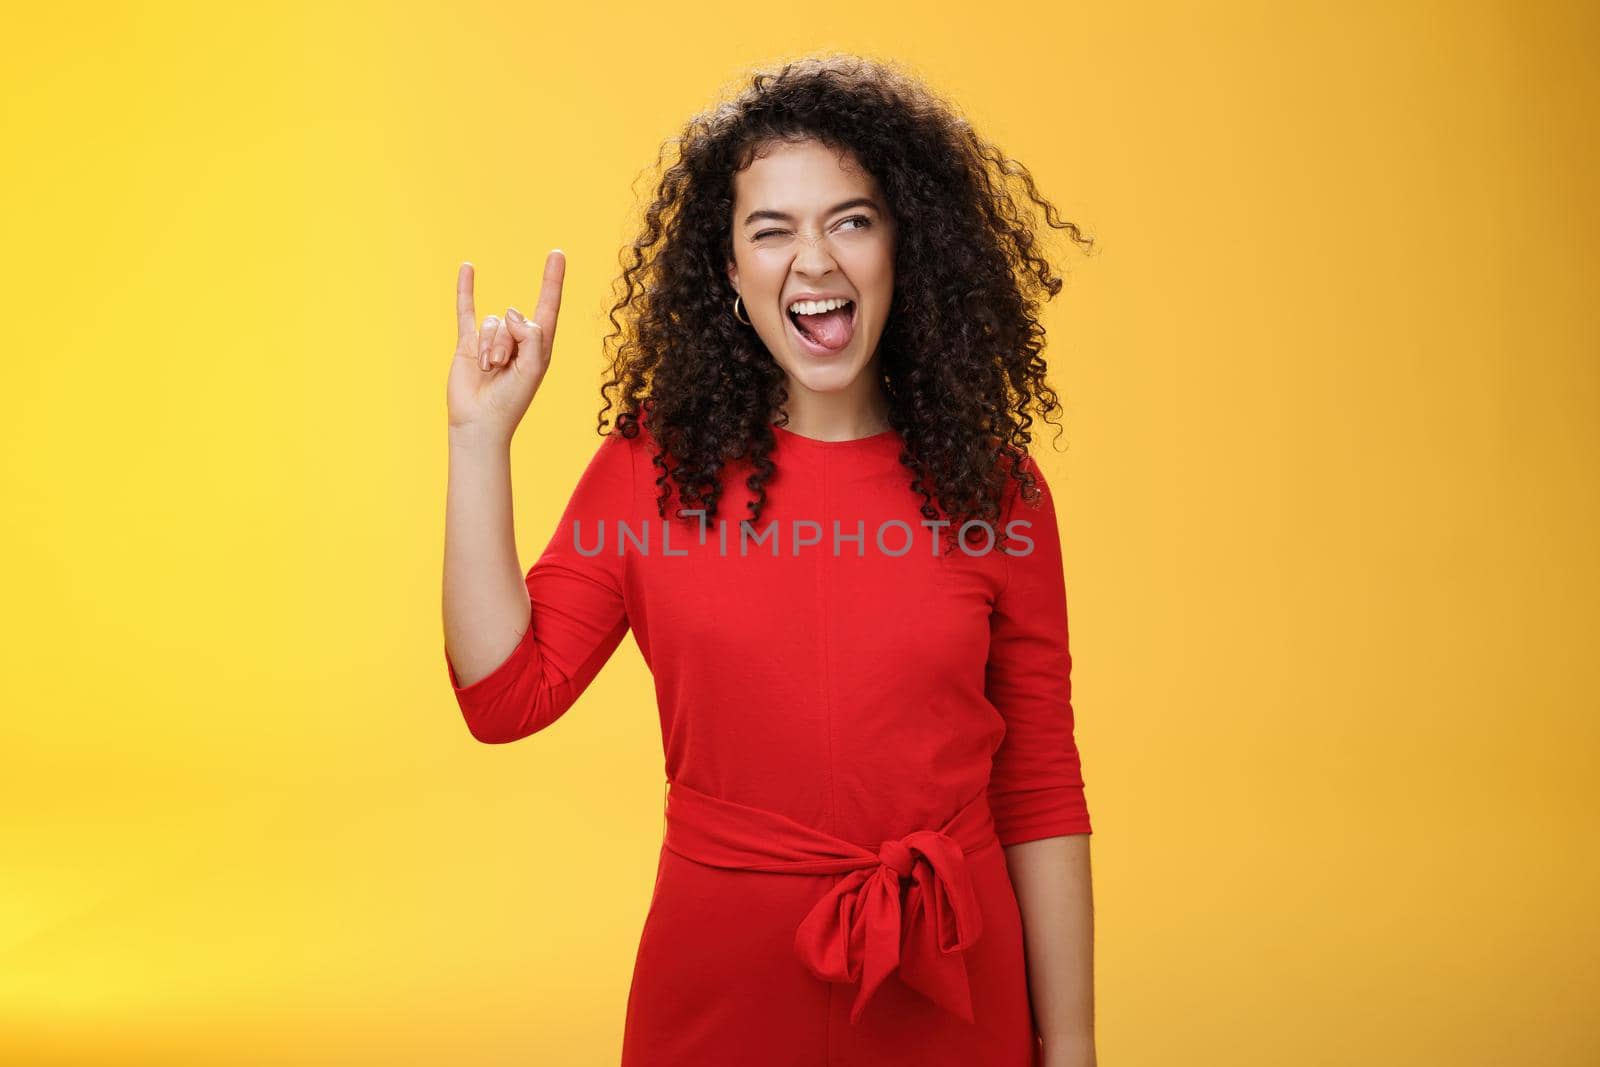 Rebellious meloman leaving in tender girl. Thrilled and carefree curly-haired woman in red dress sticking out tongue and looking right with smile as showing rock-n-roll gesture, enjoying cool music by Benzoix